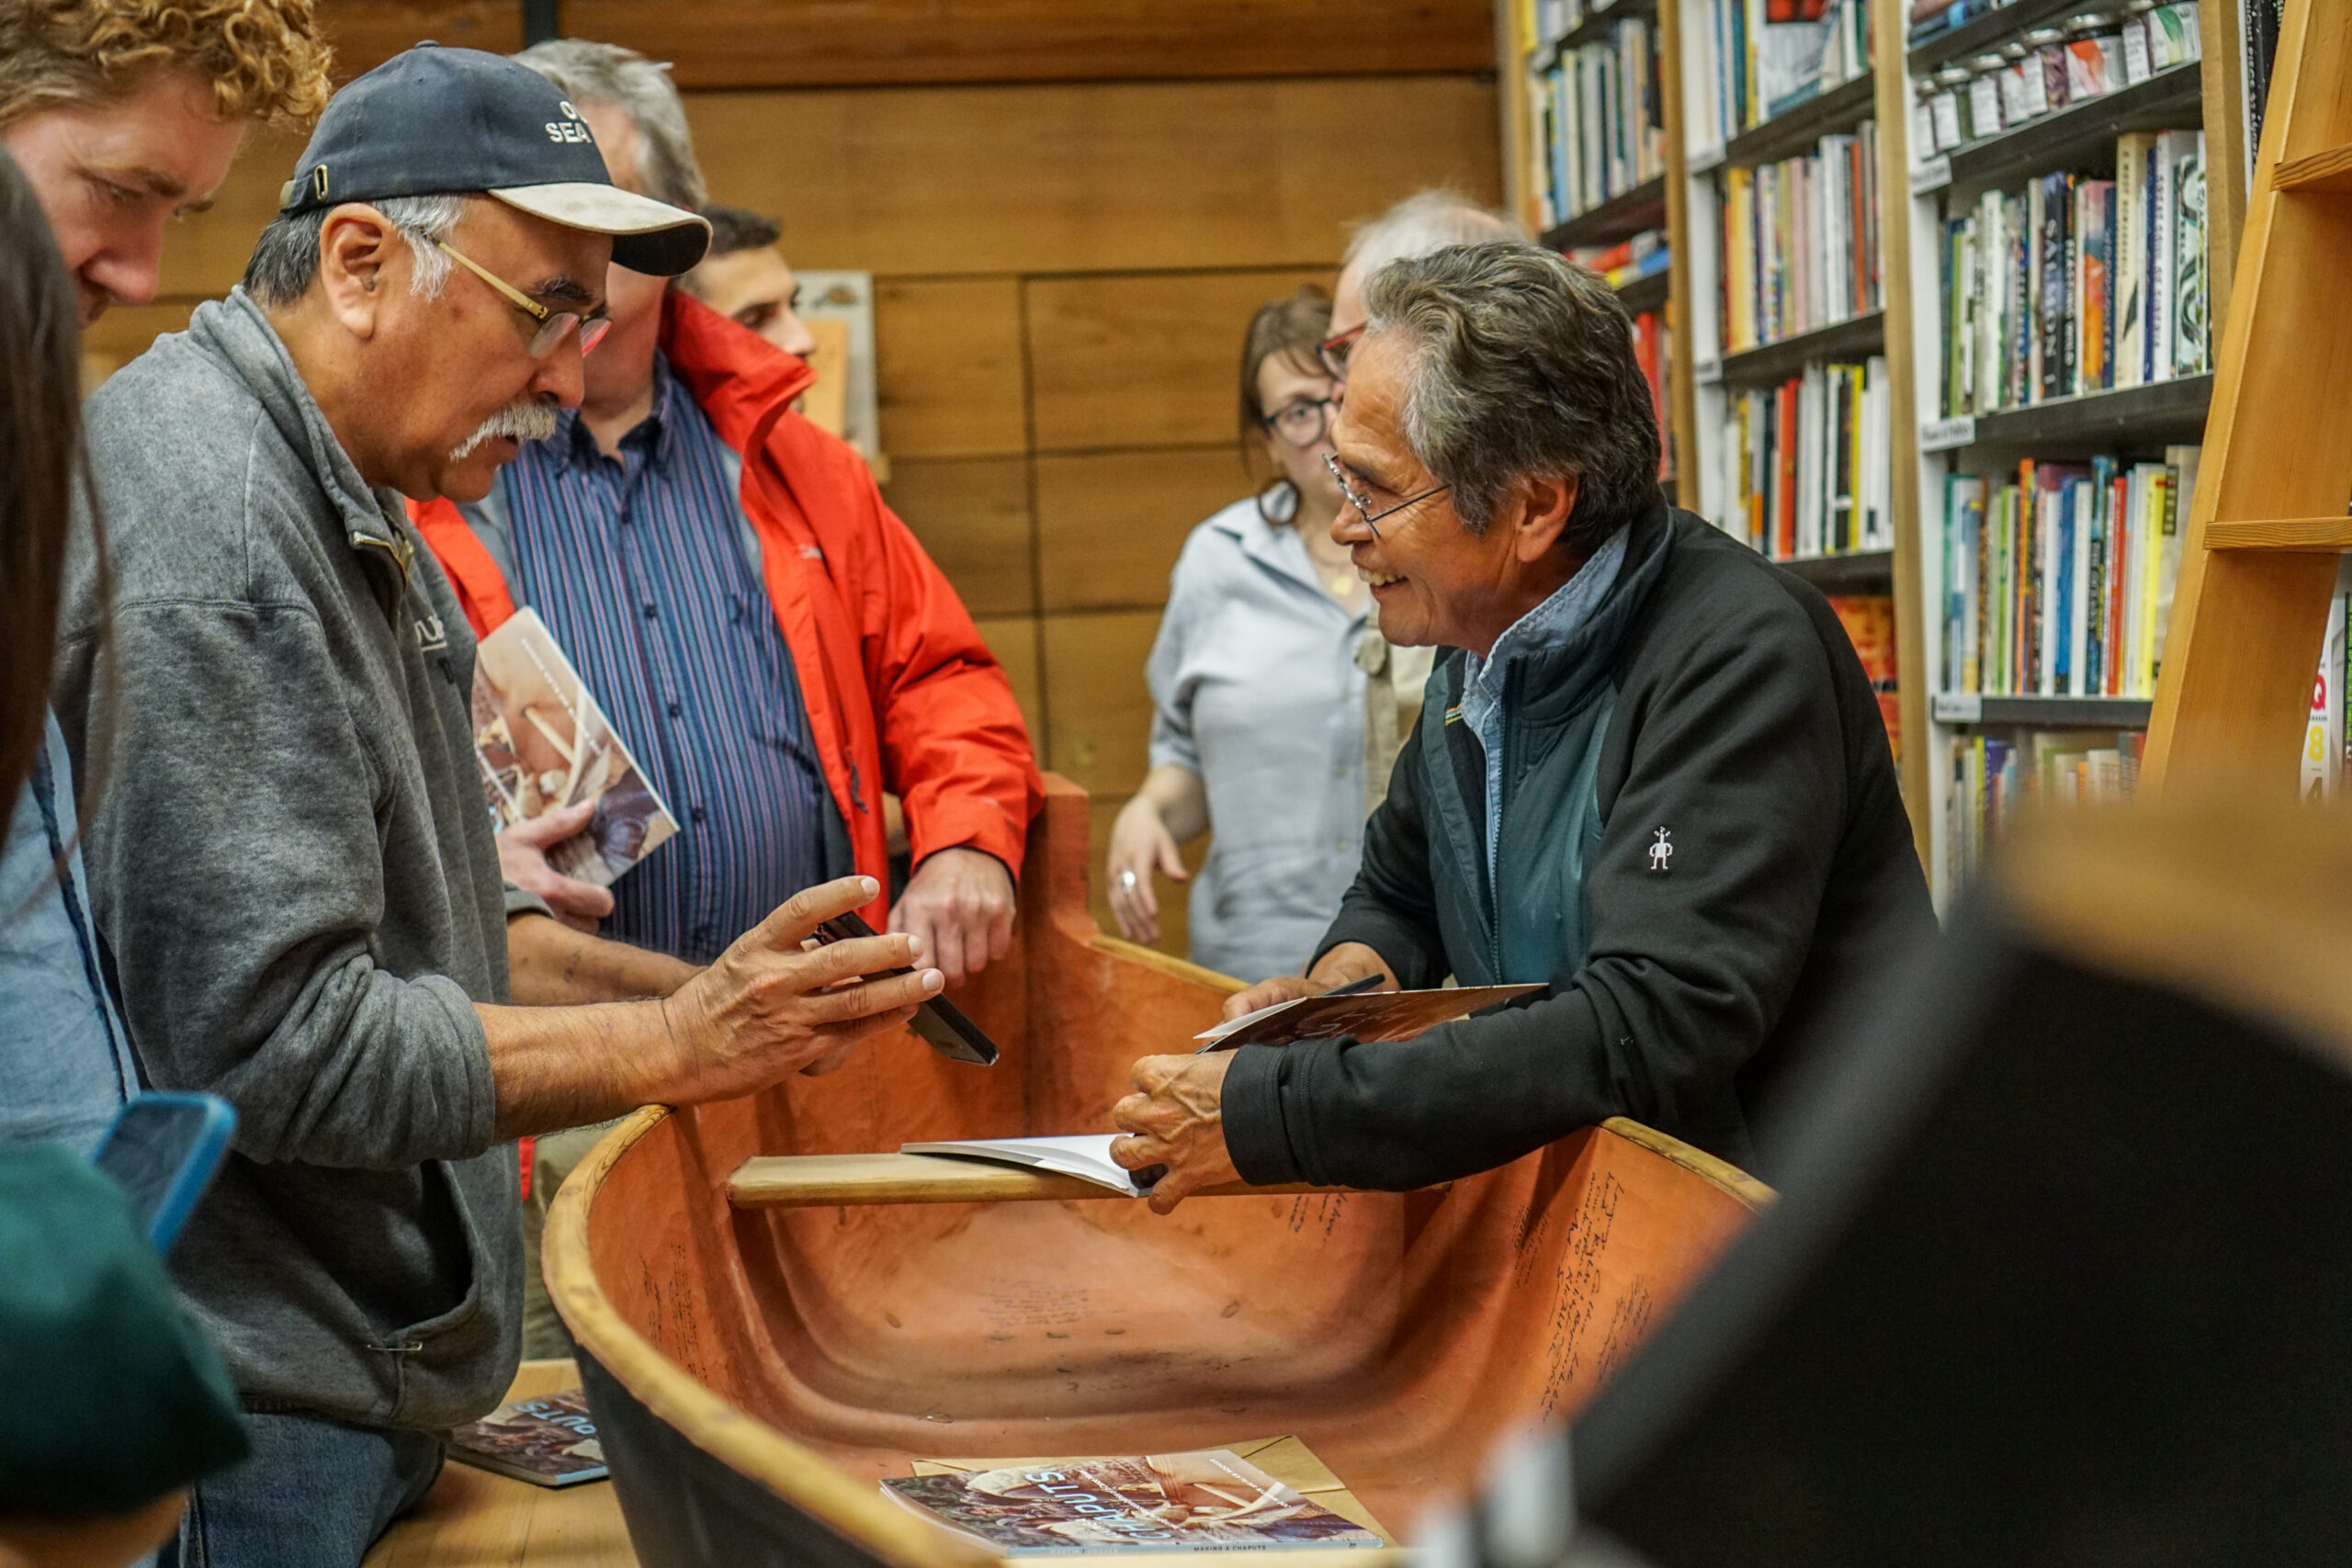 Joe Martin talked about his book and signed copies with co-author Alan Hoover at the Vacouver bookstore Upstart & Crow in Vancouver, B.C., in September 2022.